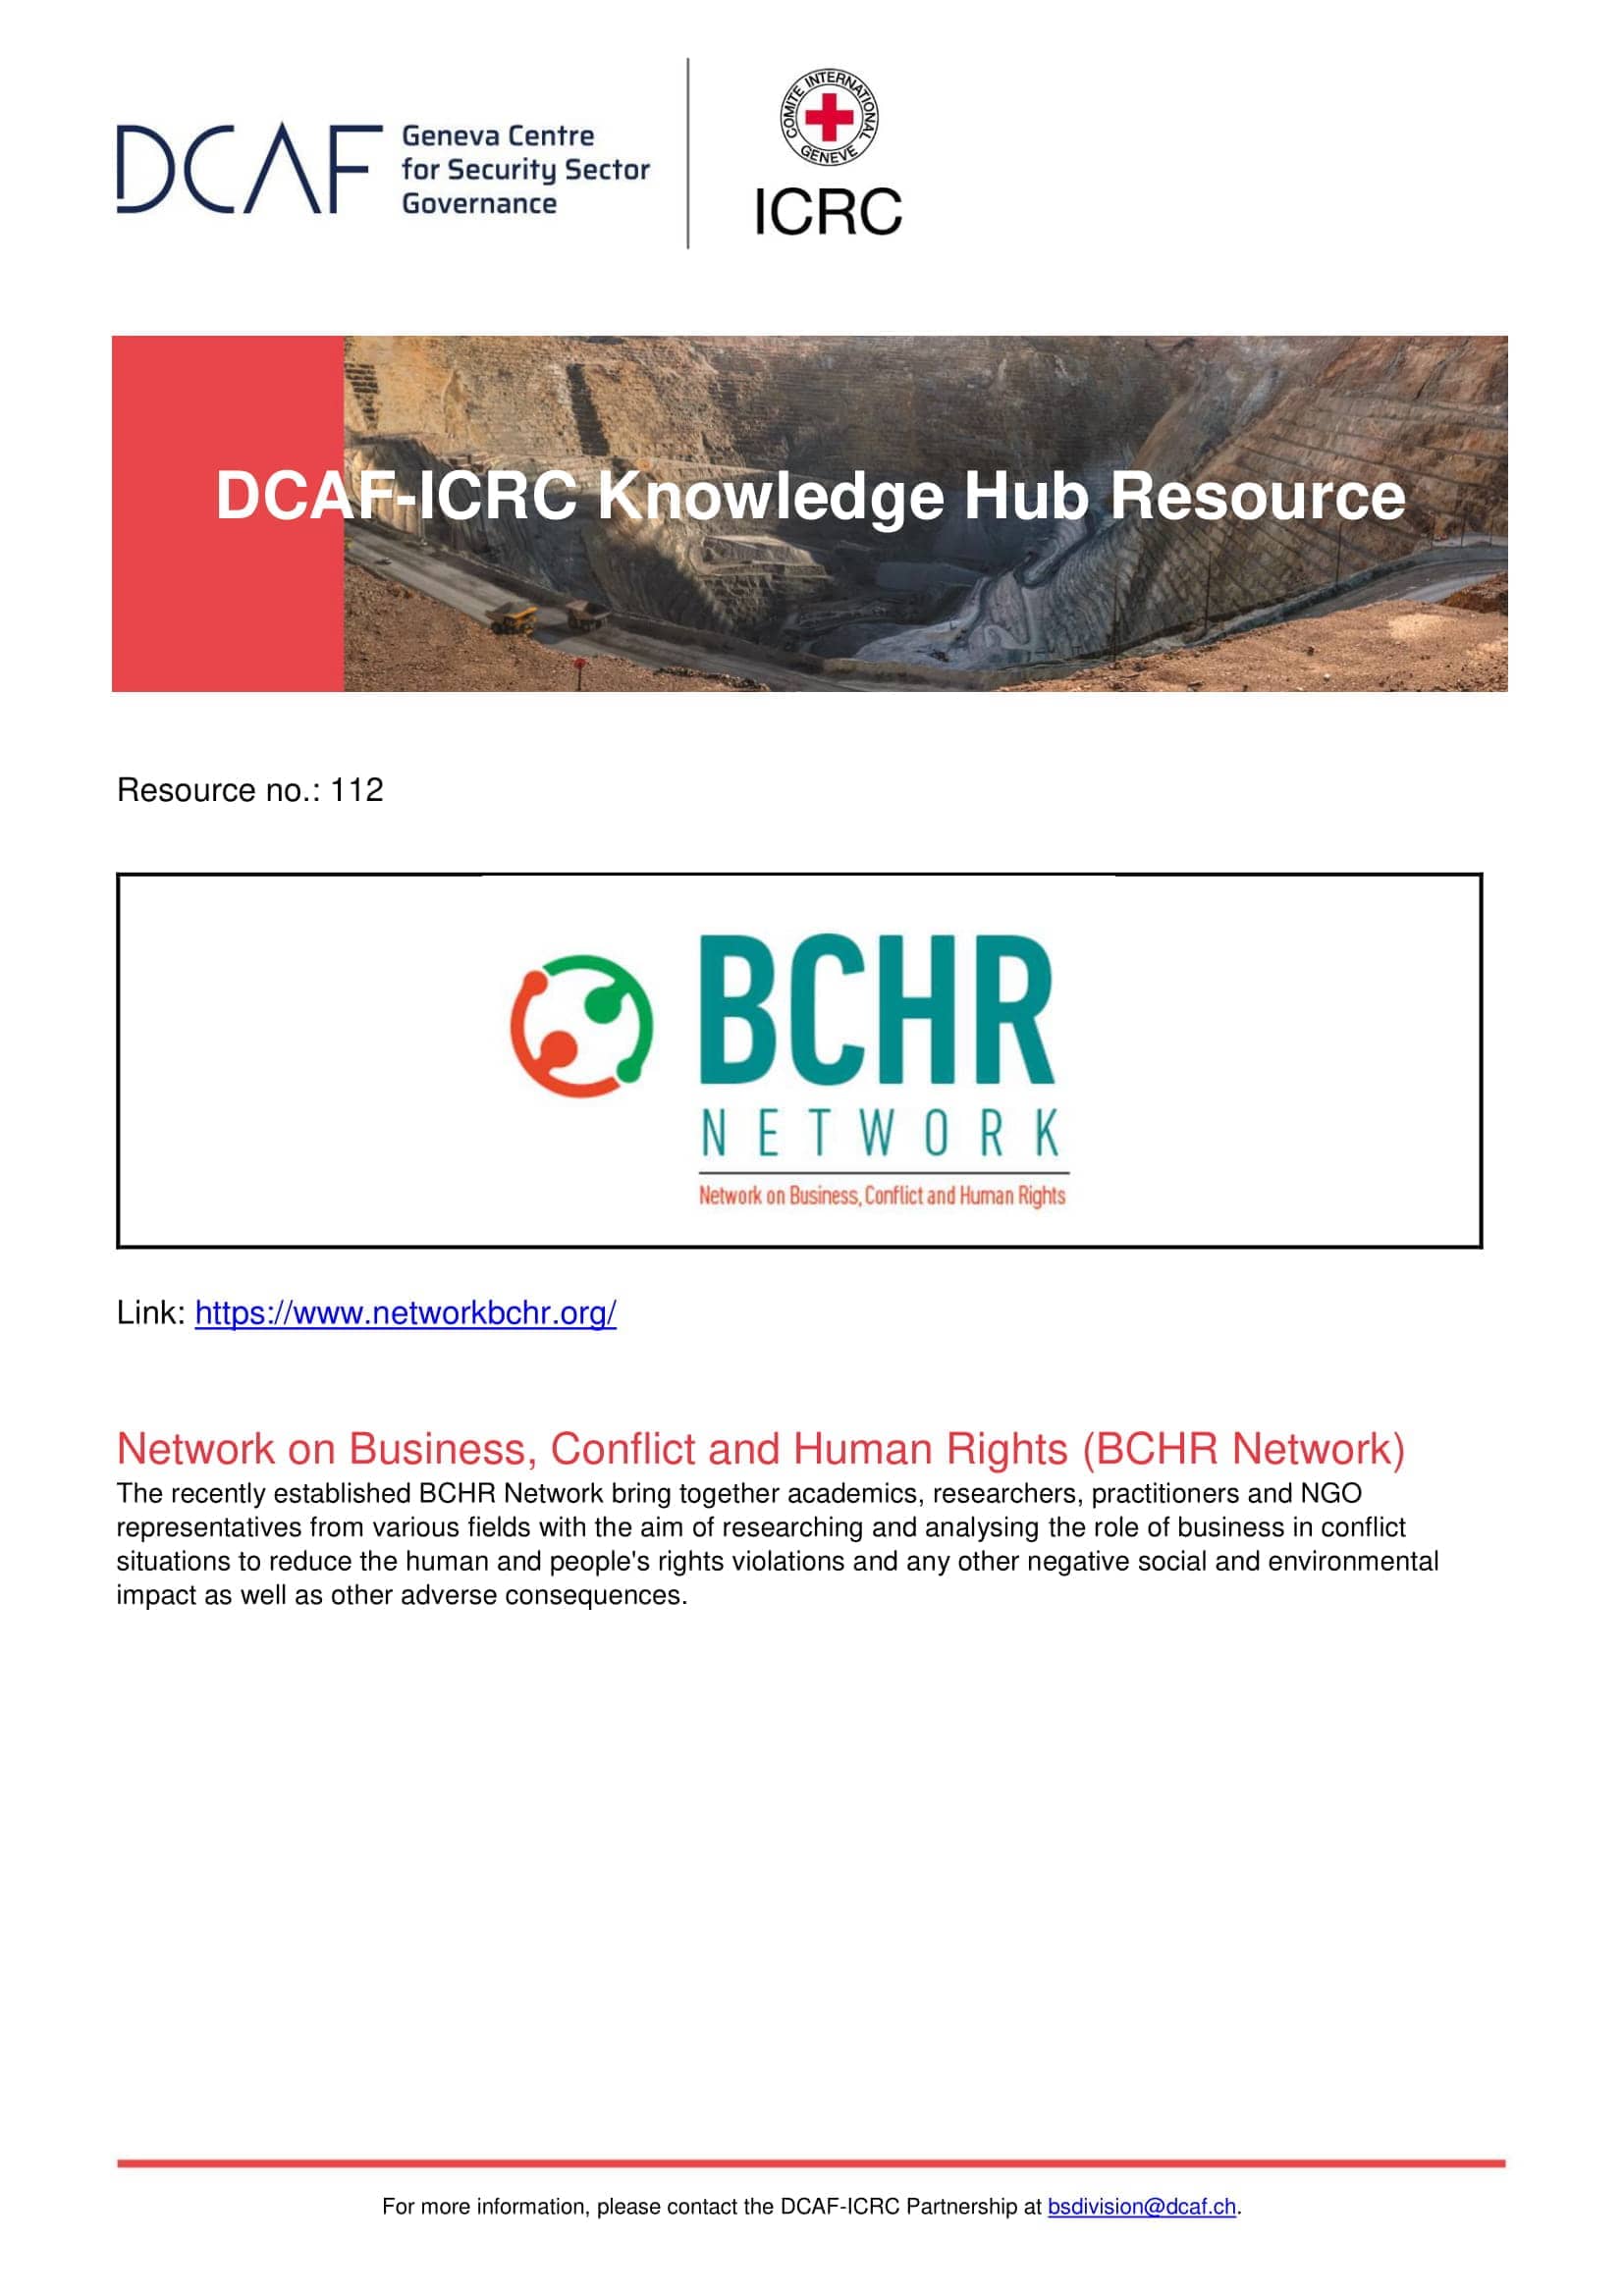 Network on Business, Conflict and Human Rights (BCHR Network)